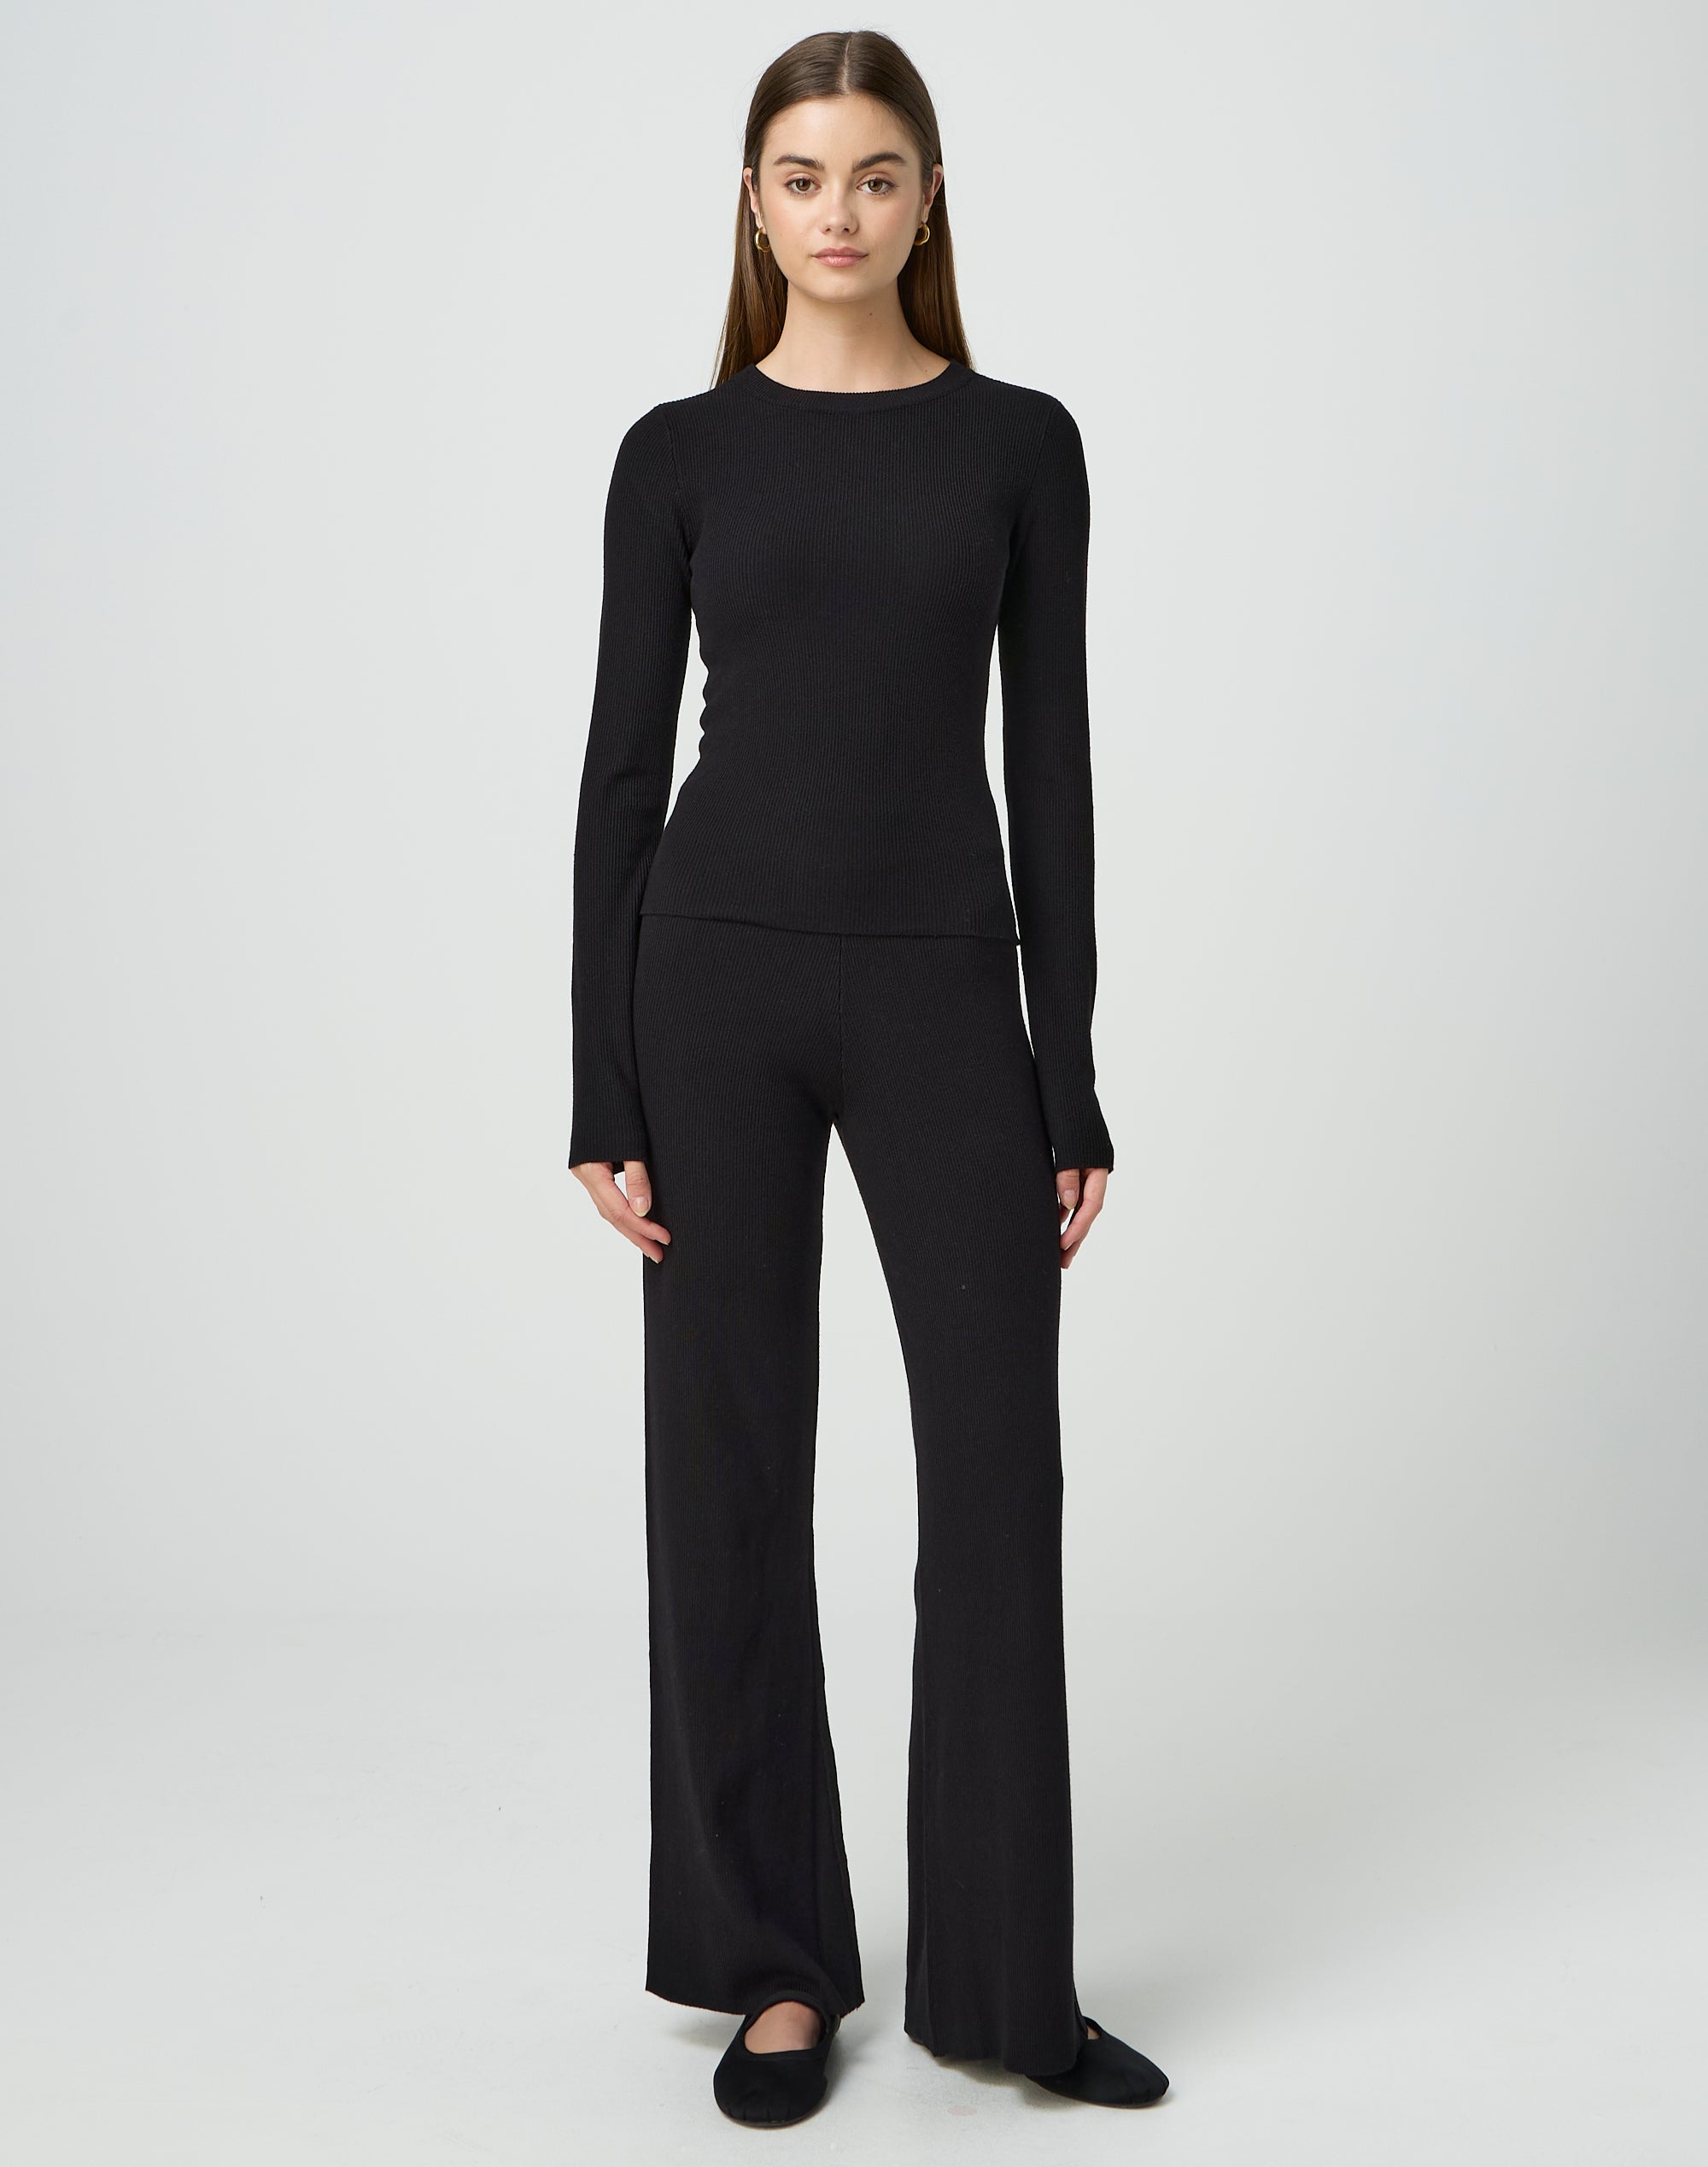 High Rise Flare Ponte Pant in Black